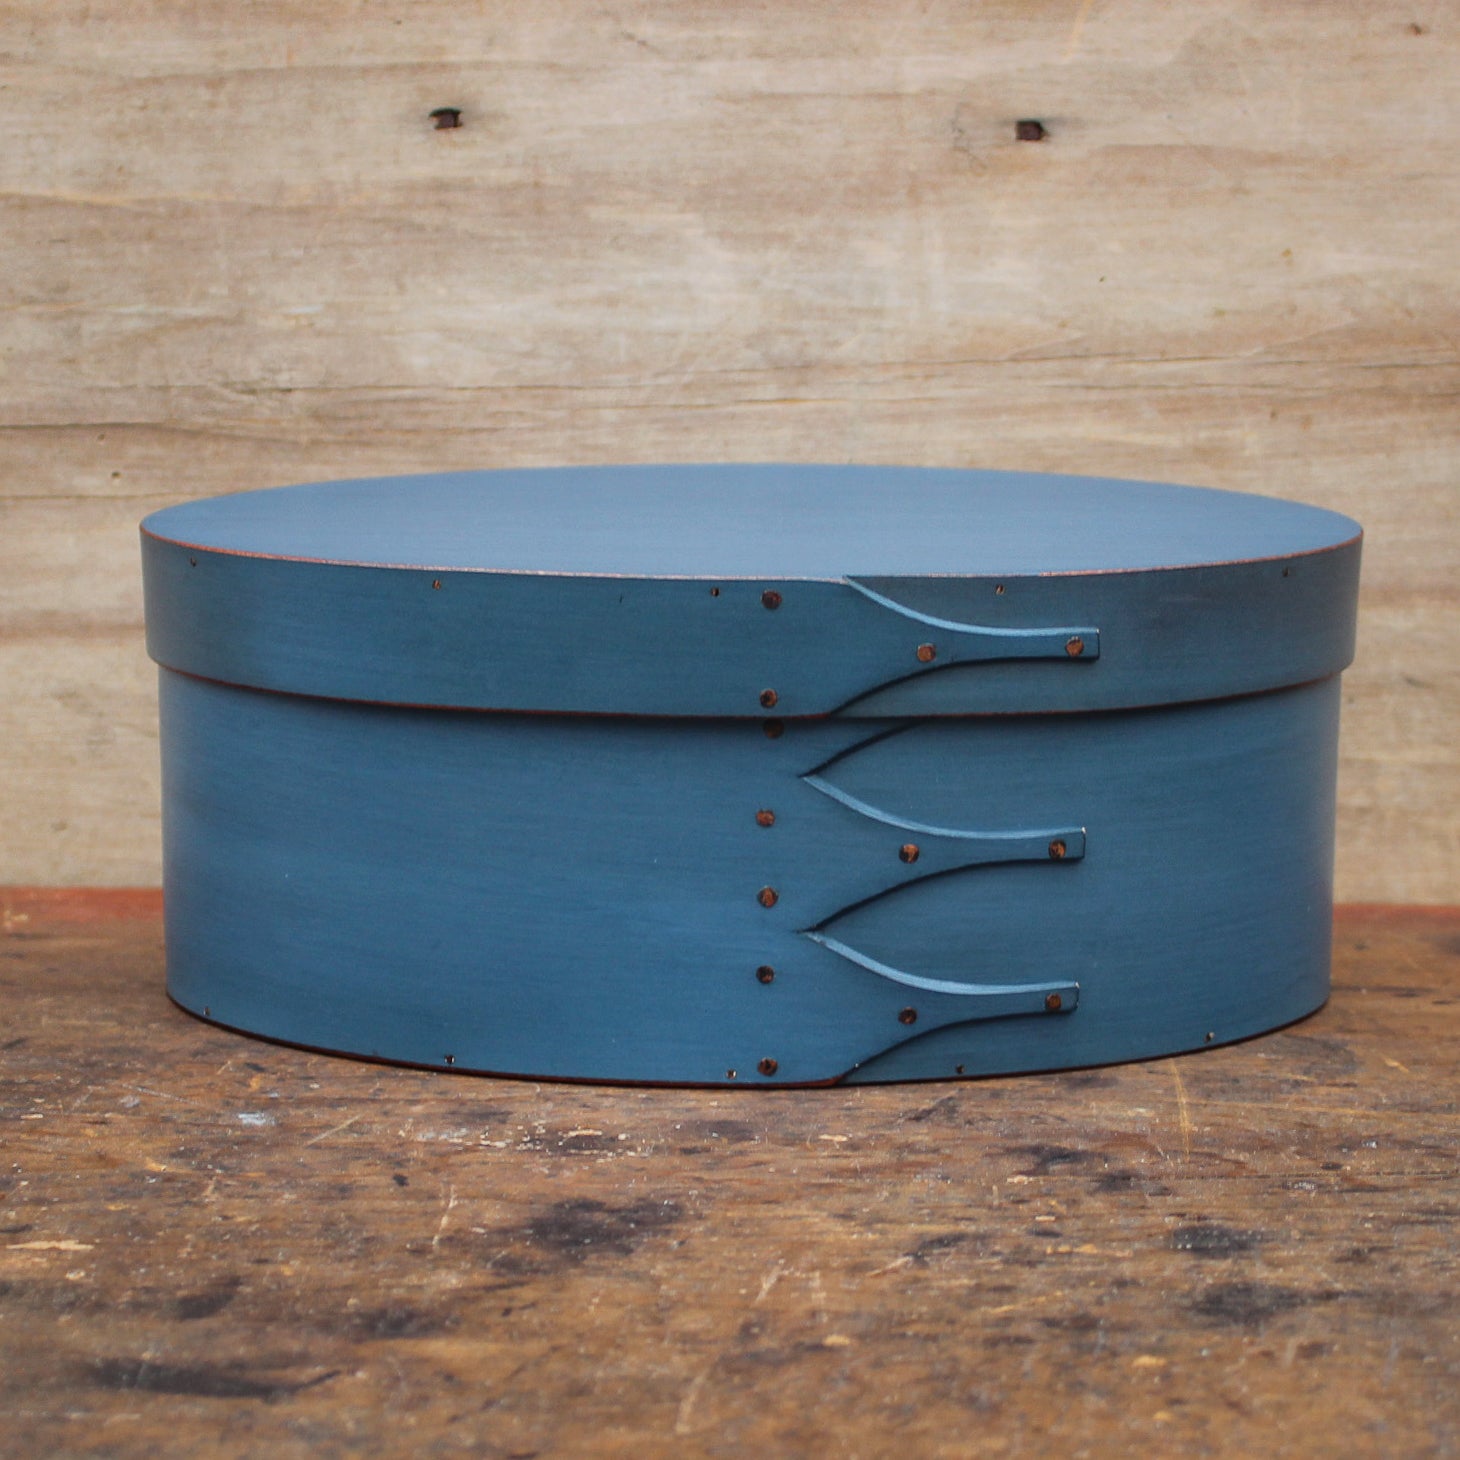 Shaker Oval Box, Size #5, LeHays Shaker Boxes, Handcrafted in Maine. Blue Milk Paint Finish, Front View